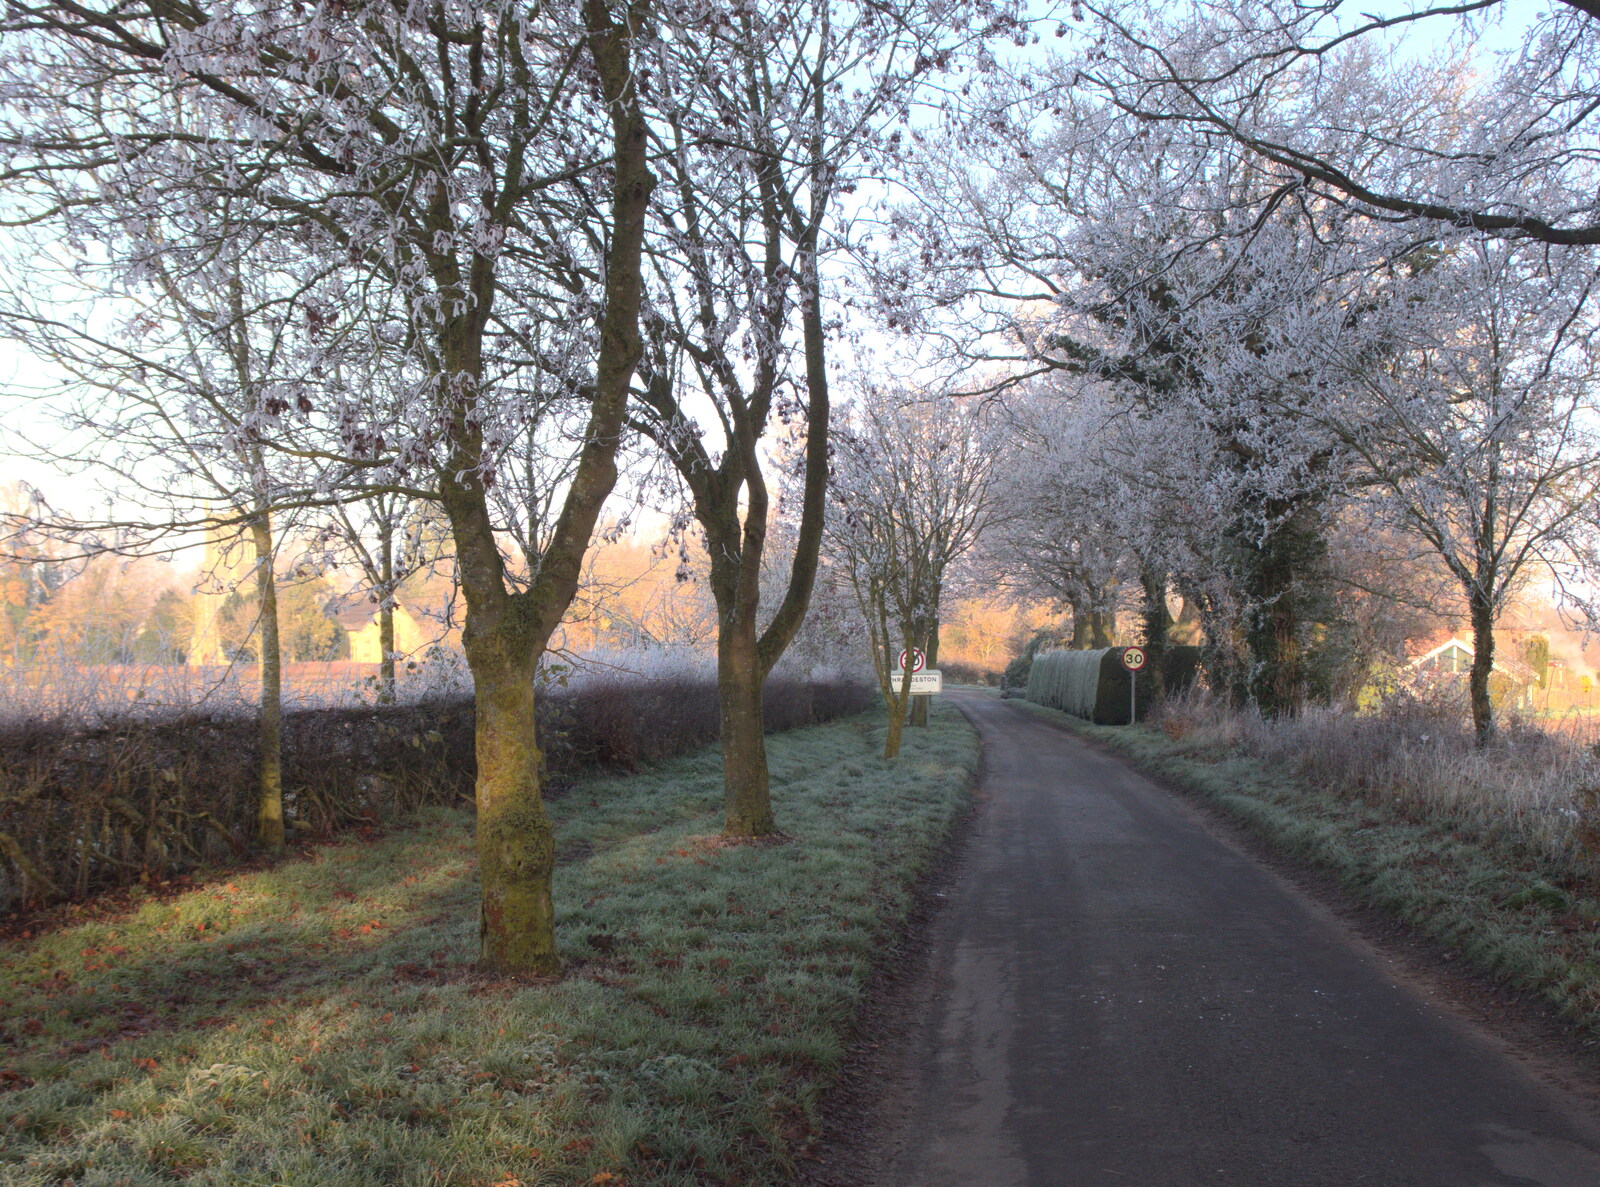 Frosty trees in Thrandeston from More Frosty Rides and the Old Mink Sheds, Brome, Suffolk - 10th December 2020